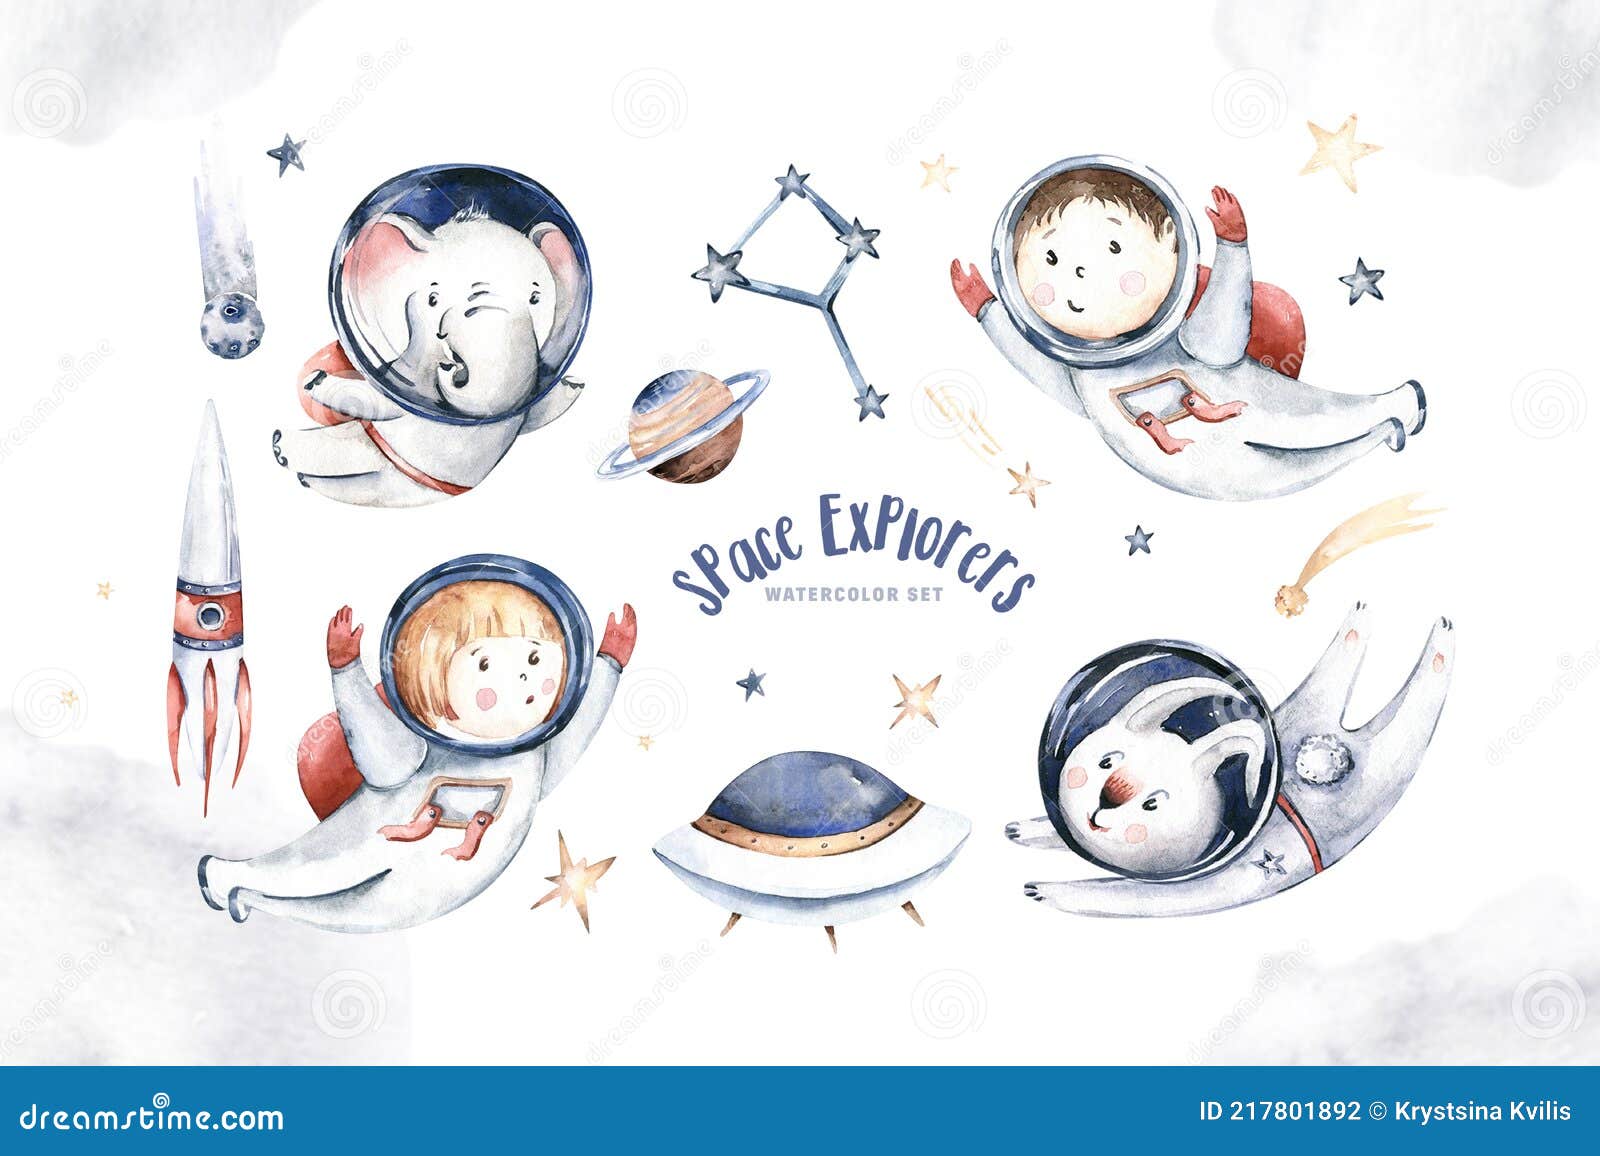 astronaut baby boy girl elephant, fox cat and bunny, space suit, cosmonaut stars, planet, moon, rocket and shuttle